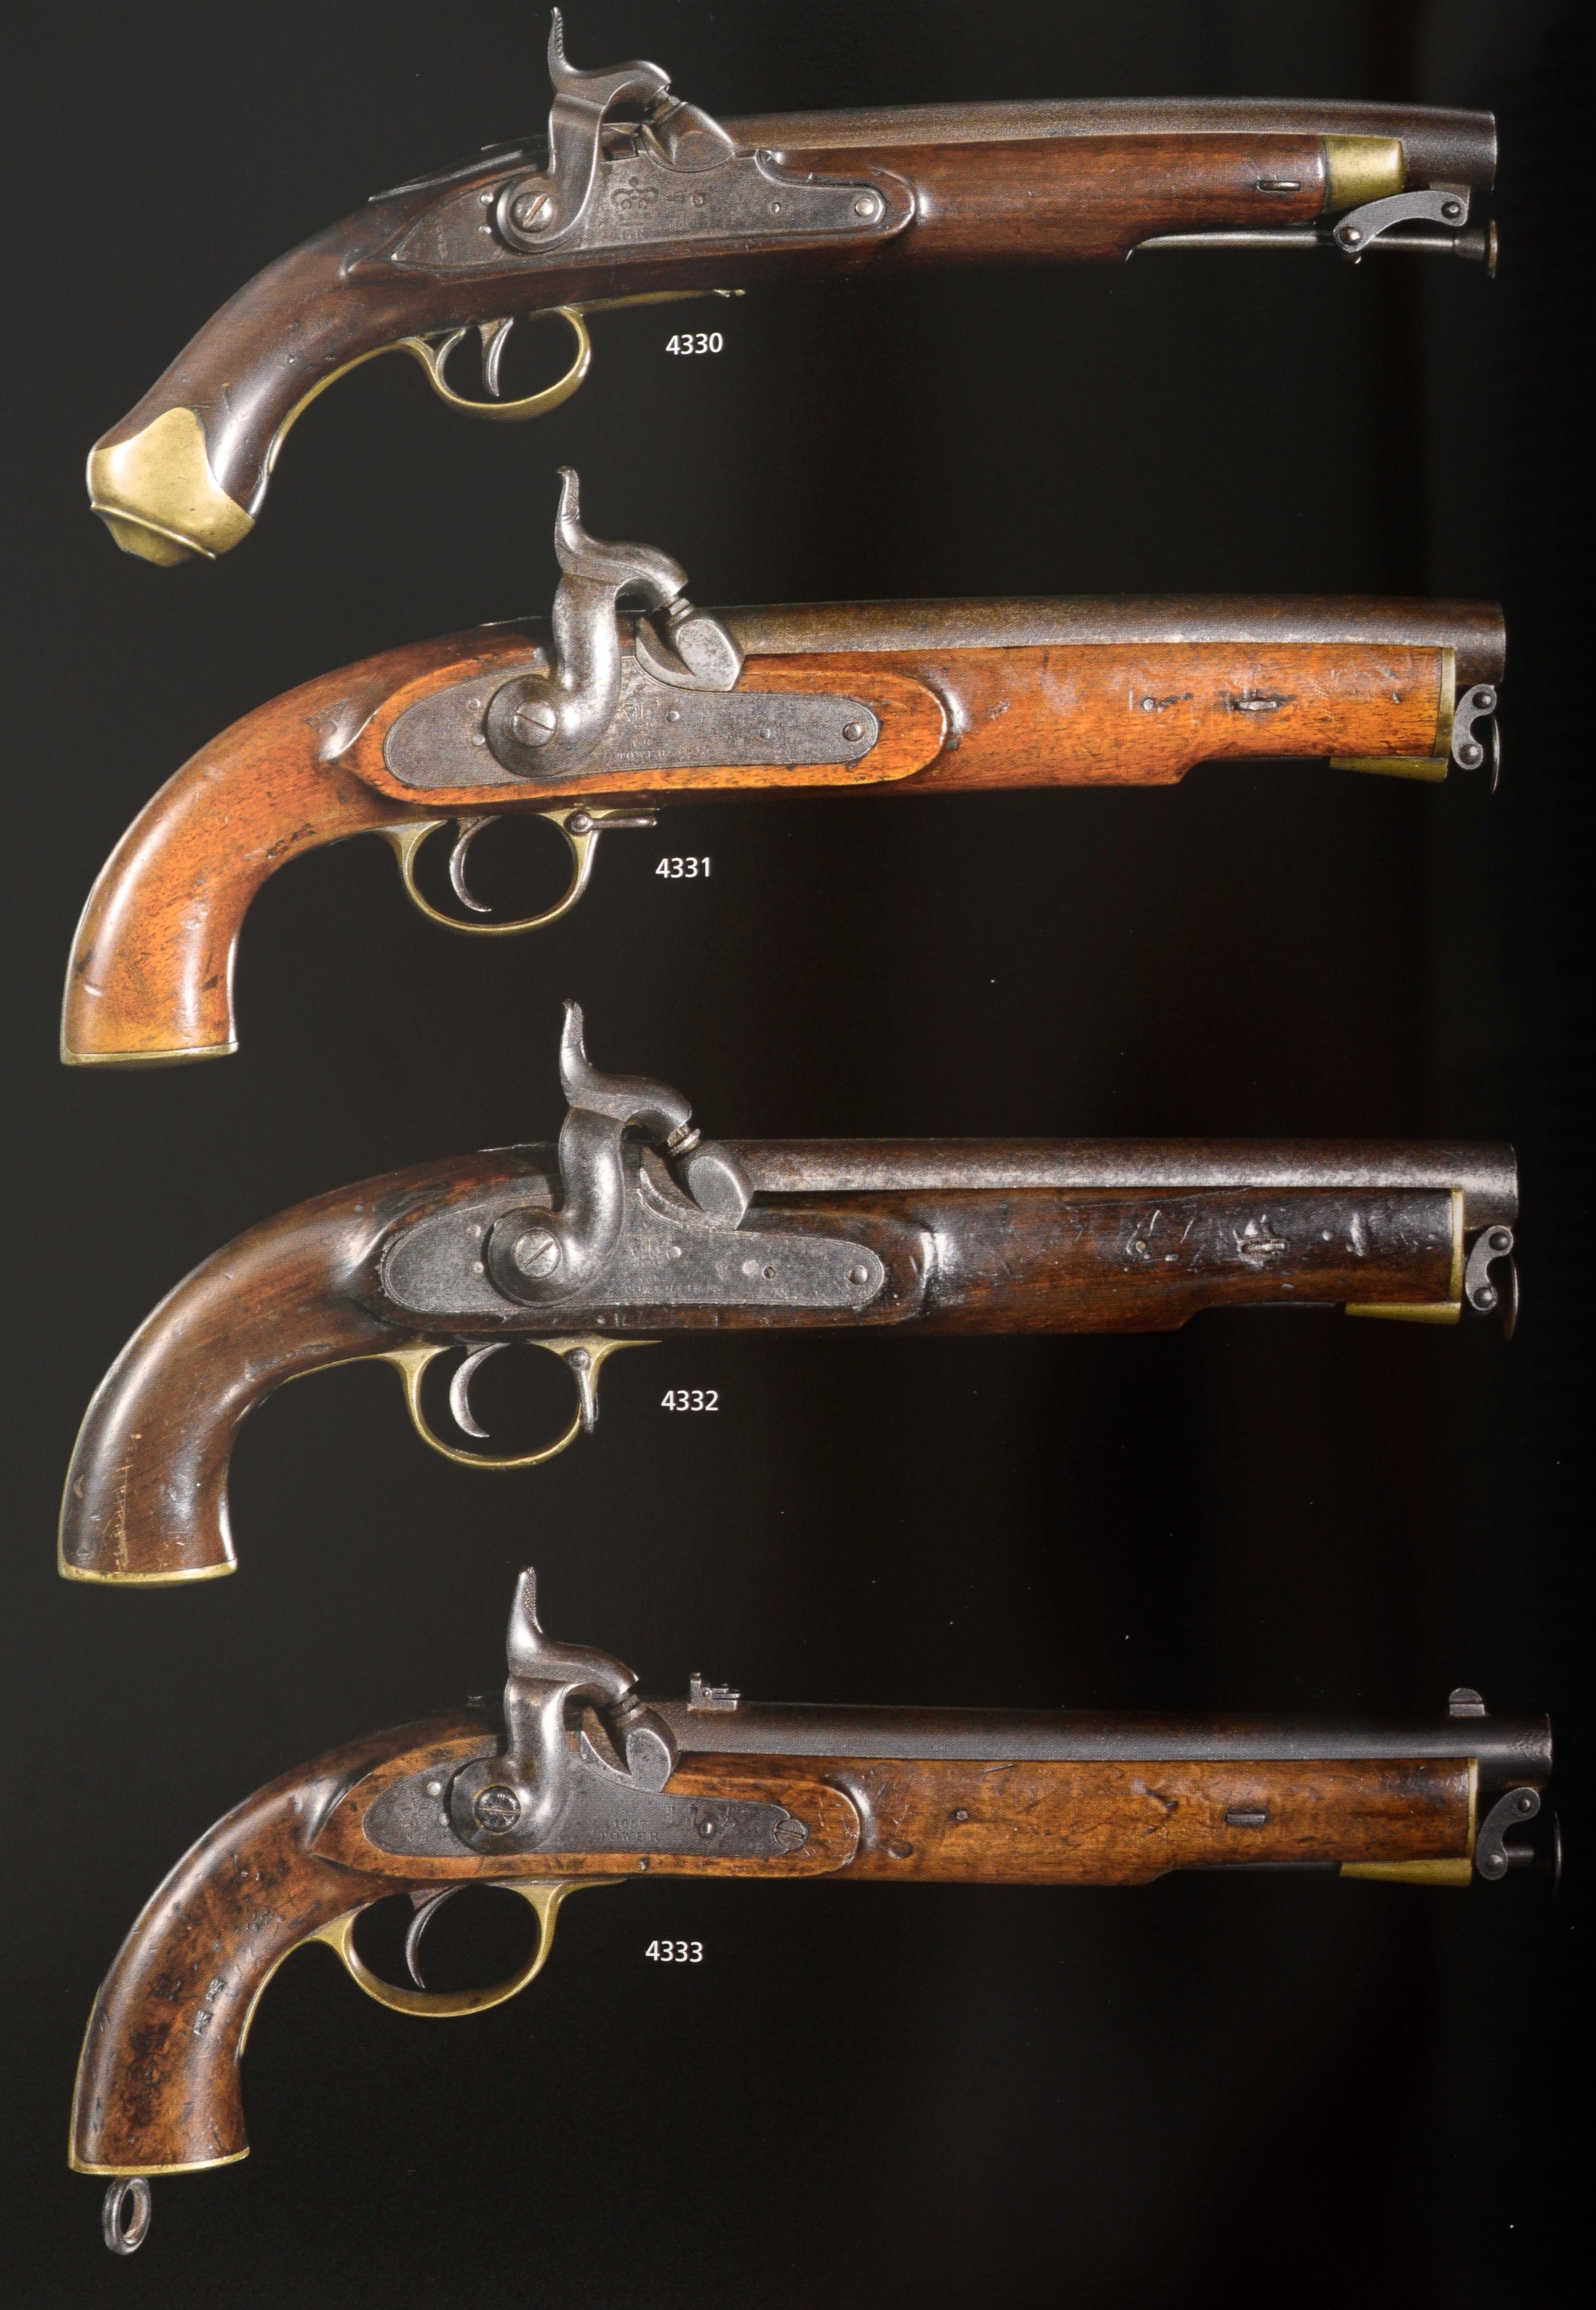 Bonhams 2013 Antique Arms & Armour Featured a Revolver Owned by Wild Bill Hickok For Sale 2